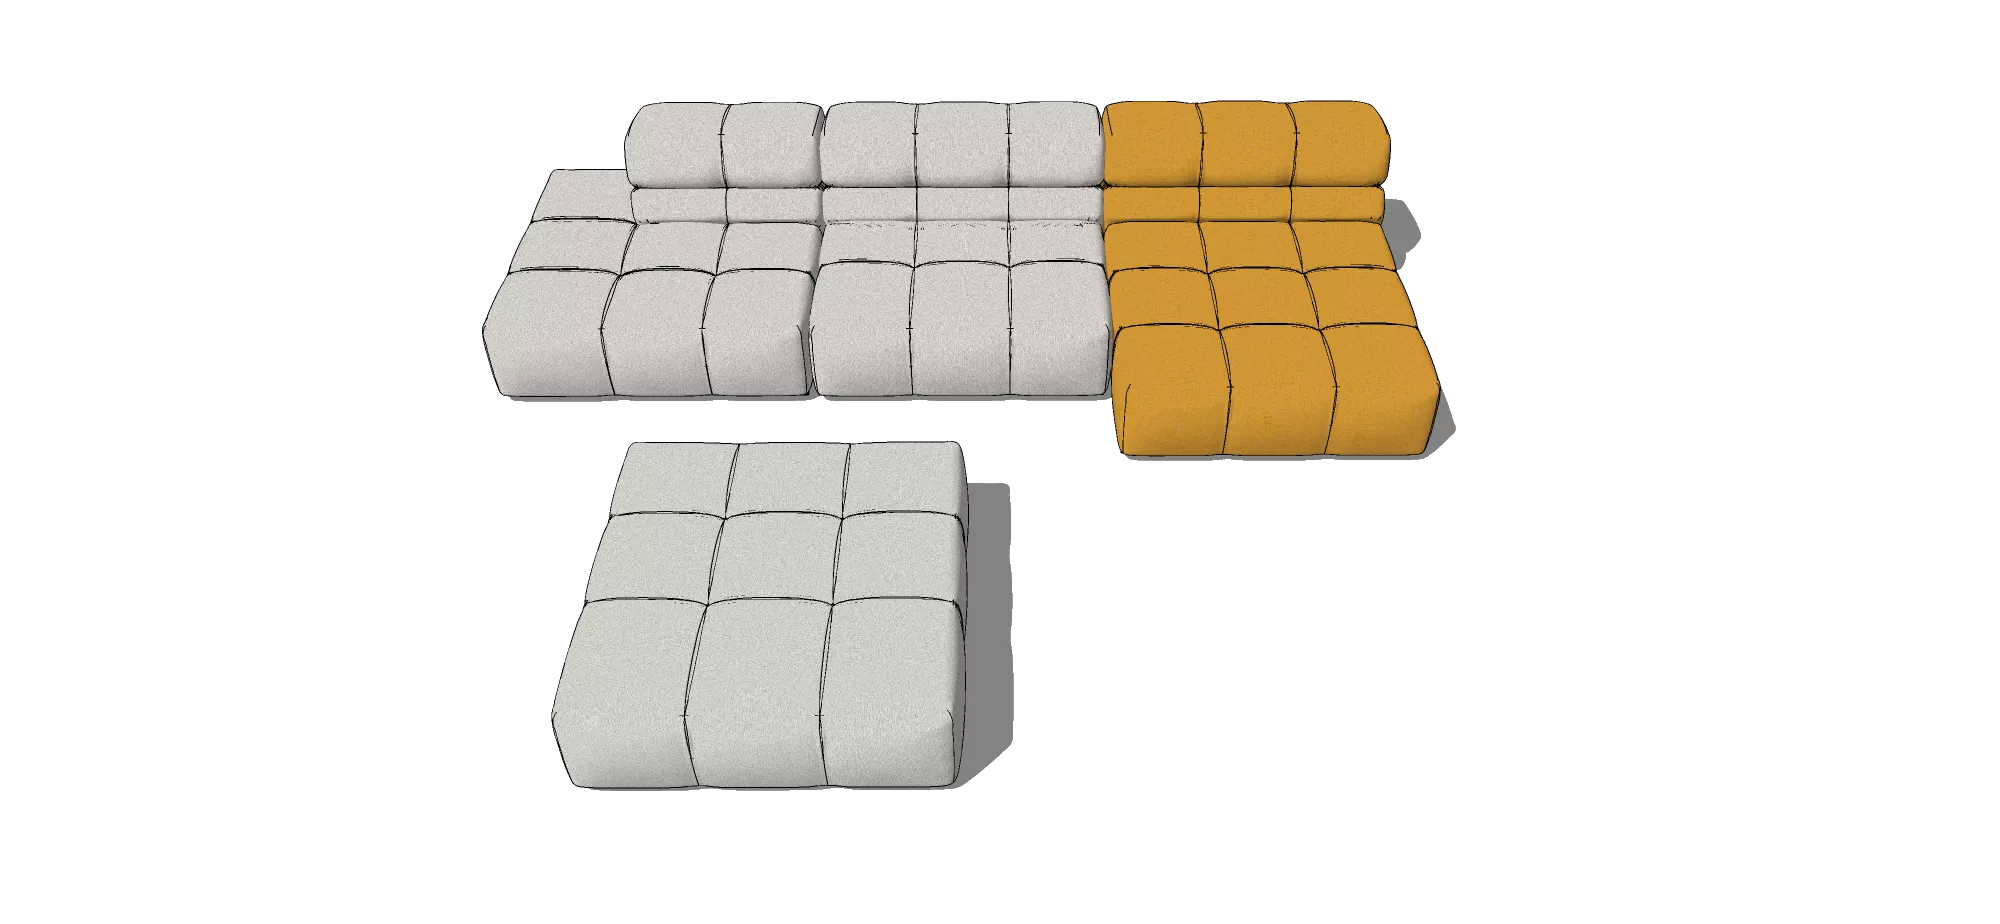 MODERN SOFA - SKETCHUP 3D MODEL - VRAY OR ENSCAPE - ID13077